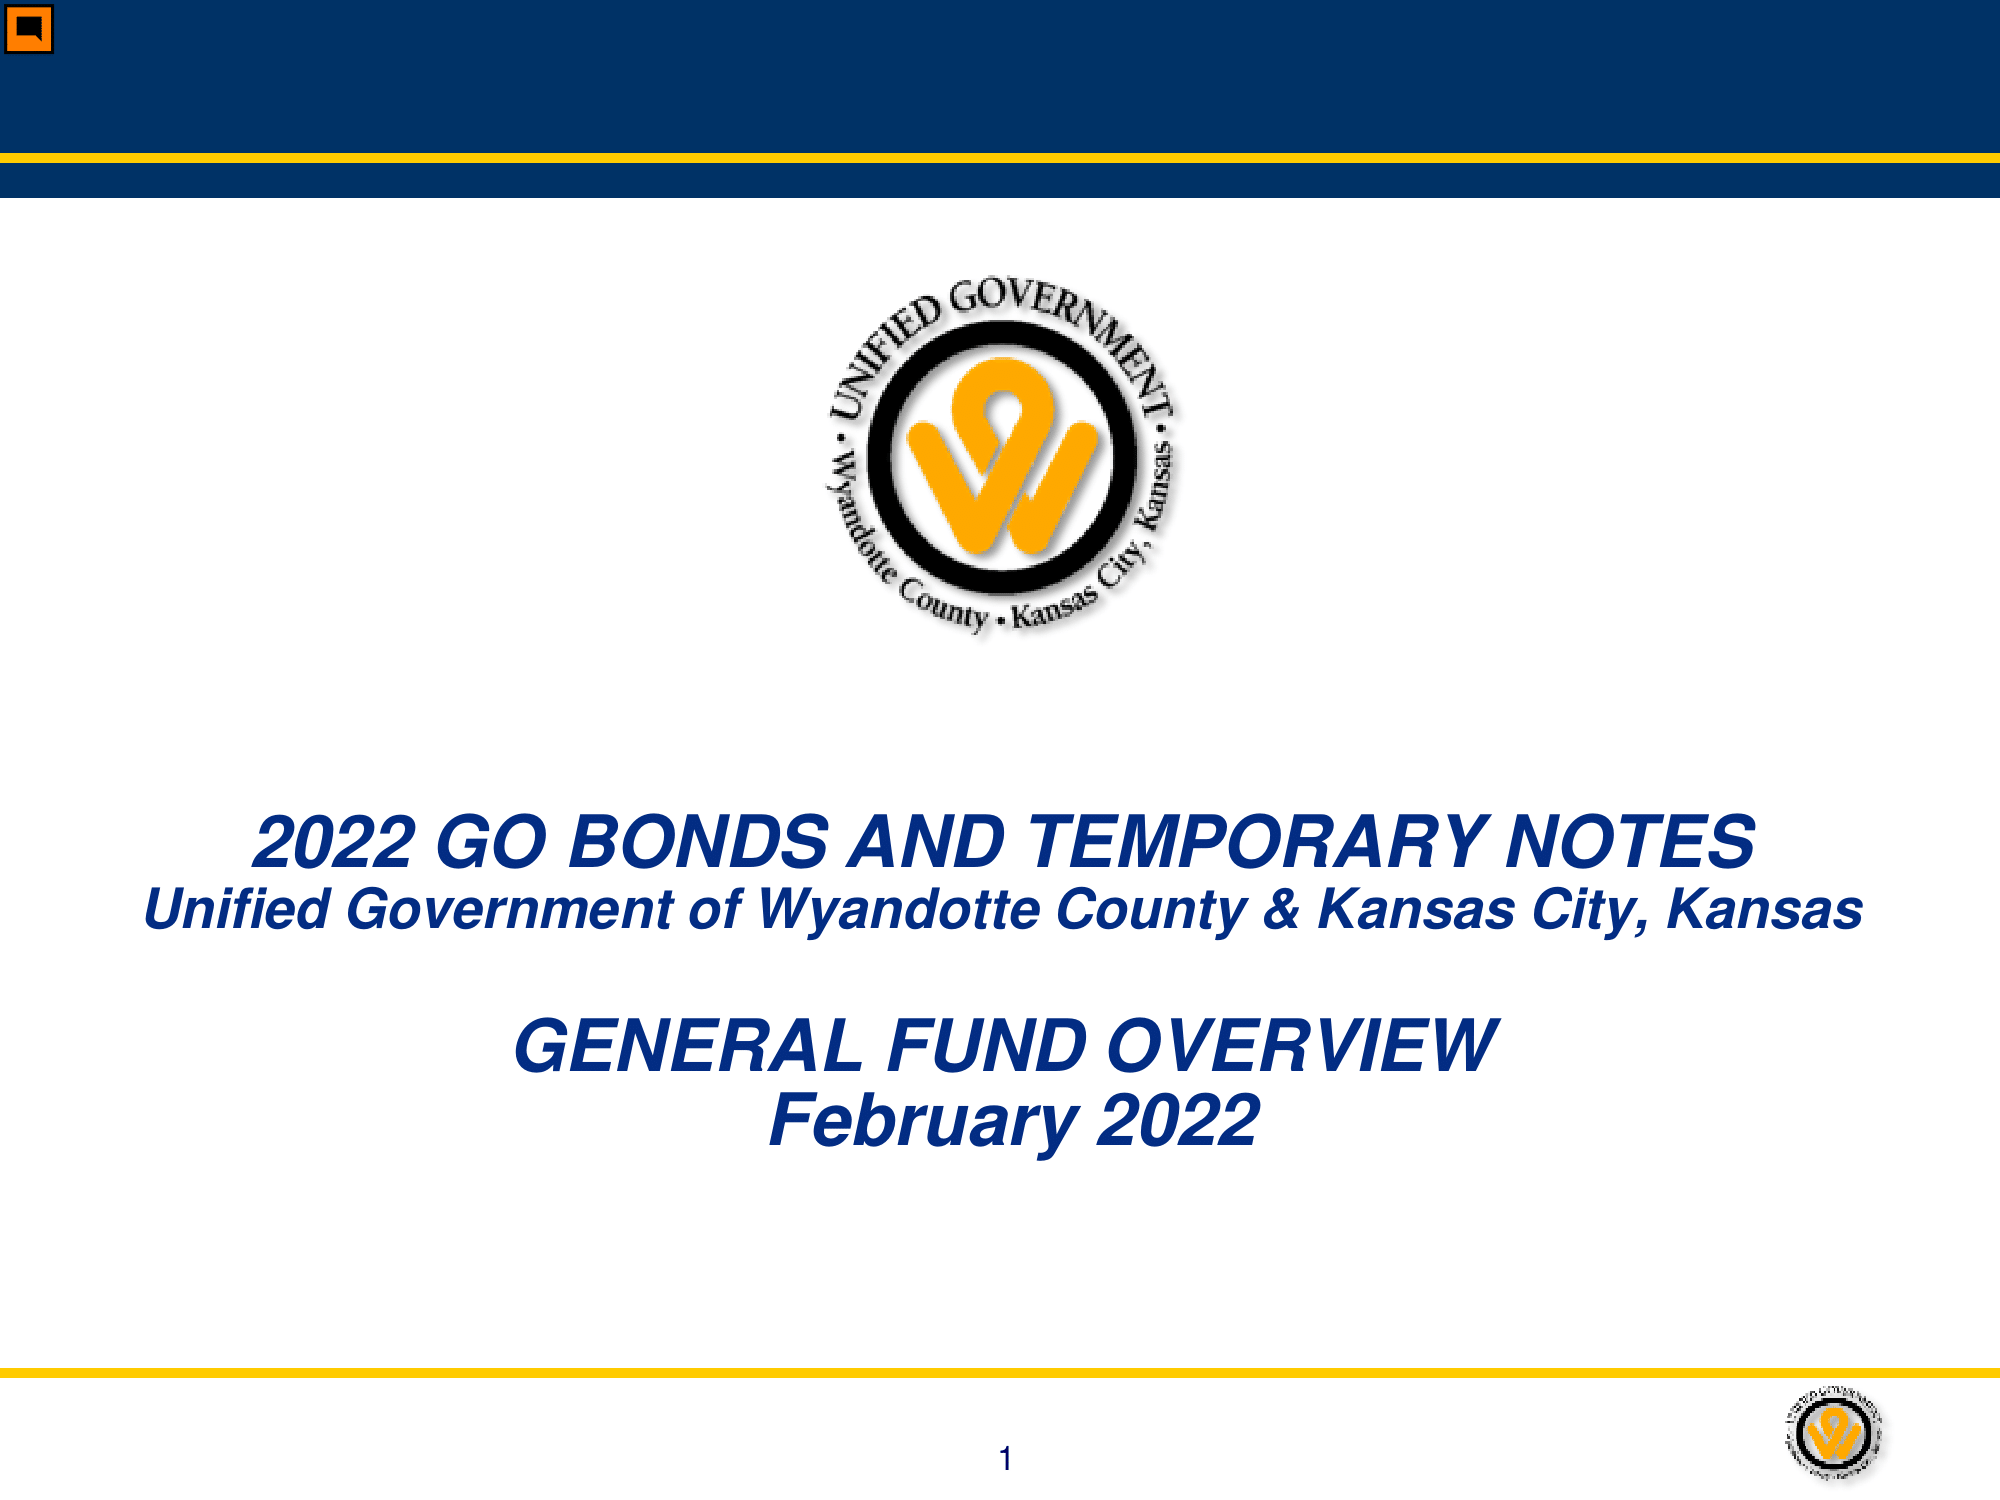 2022 GO Bonds and Temporary Notes - General Fund Overview, February 2022